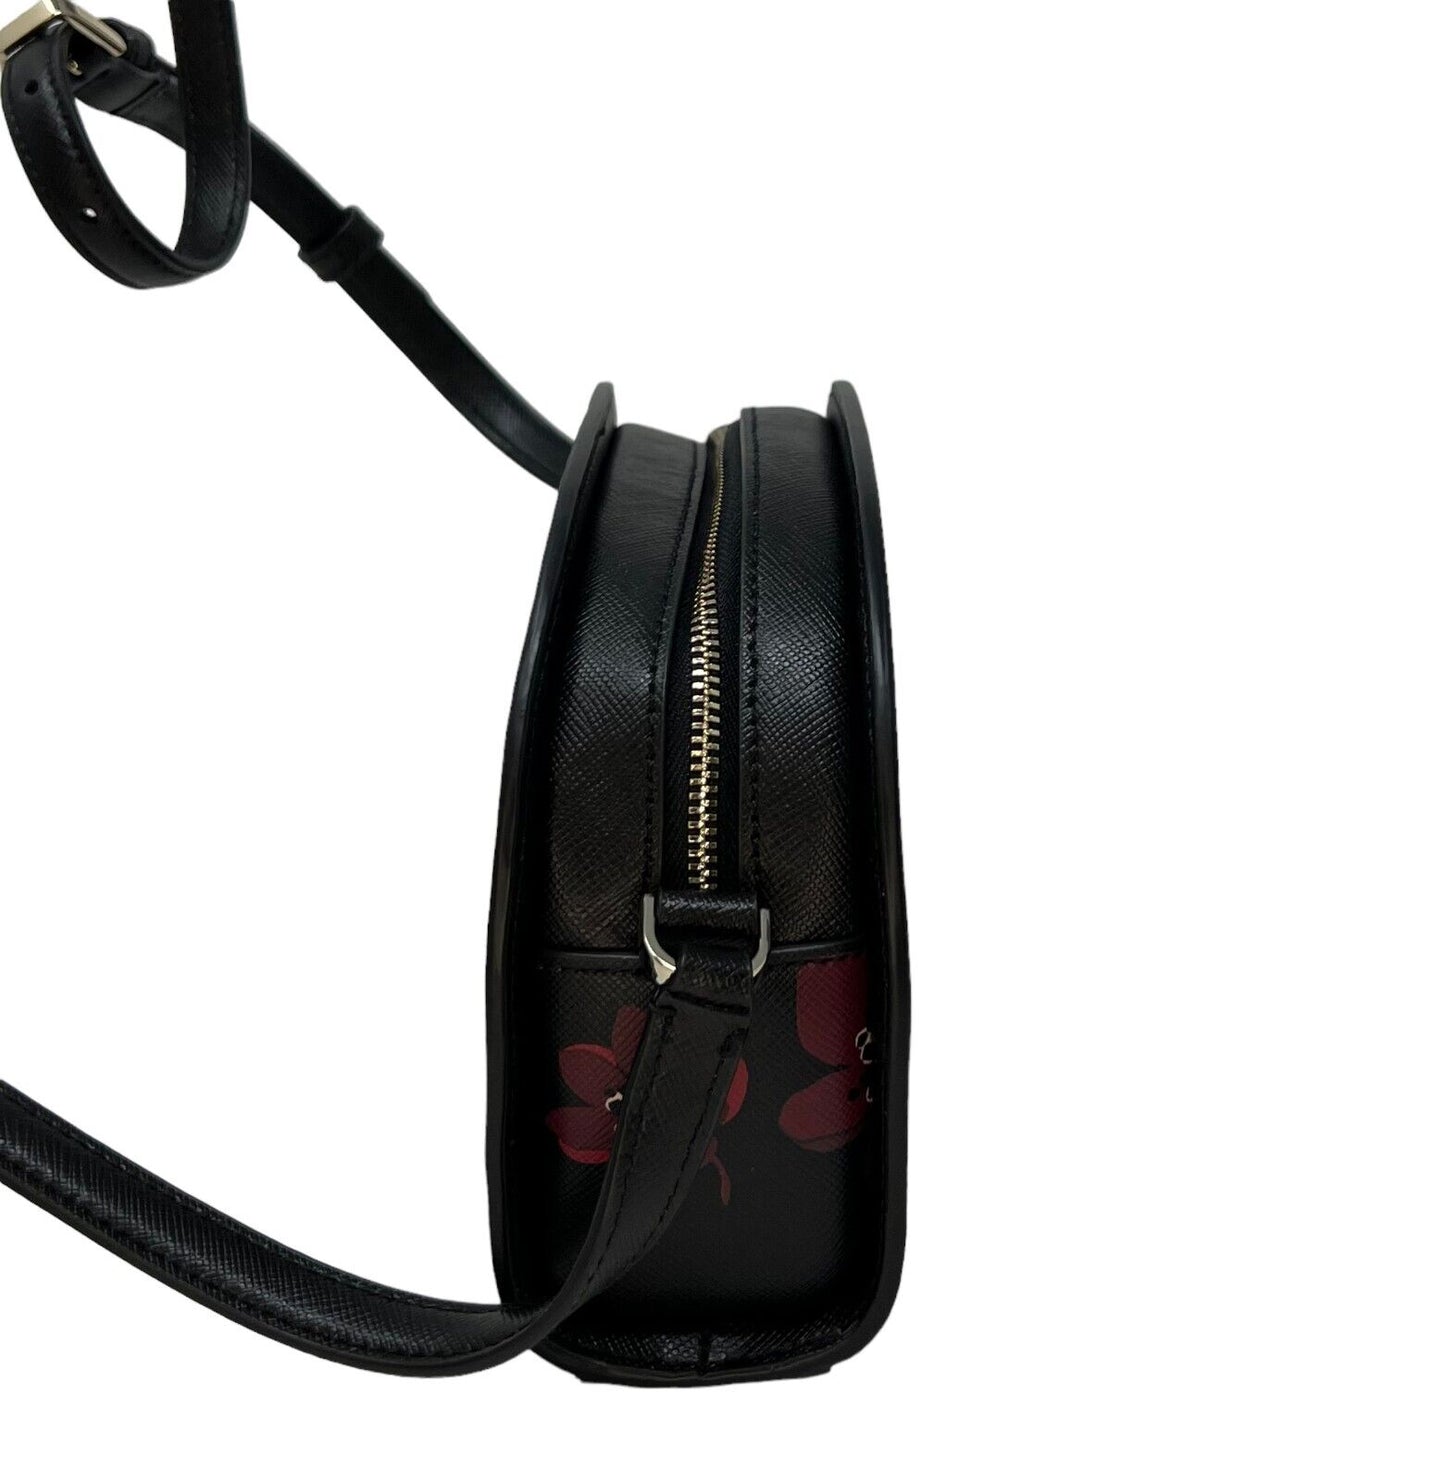 Kate Spade Perry Dancing Blooms Leather Black Dome Crossbody Bag K9606 $279